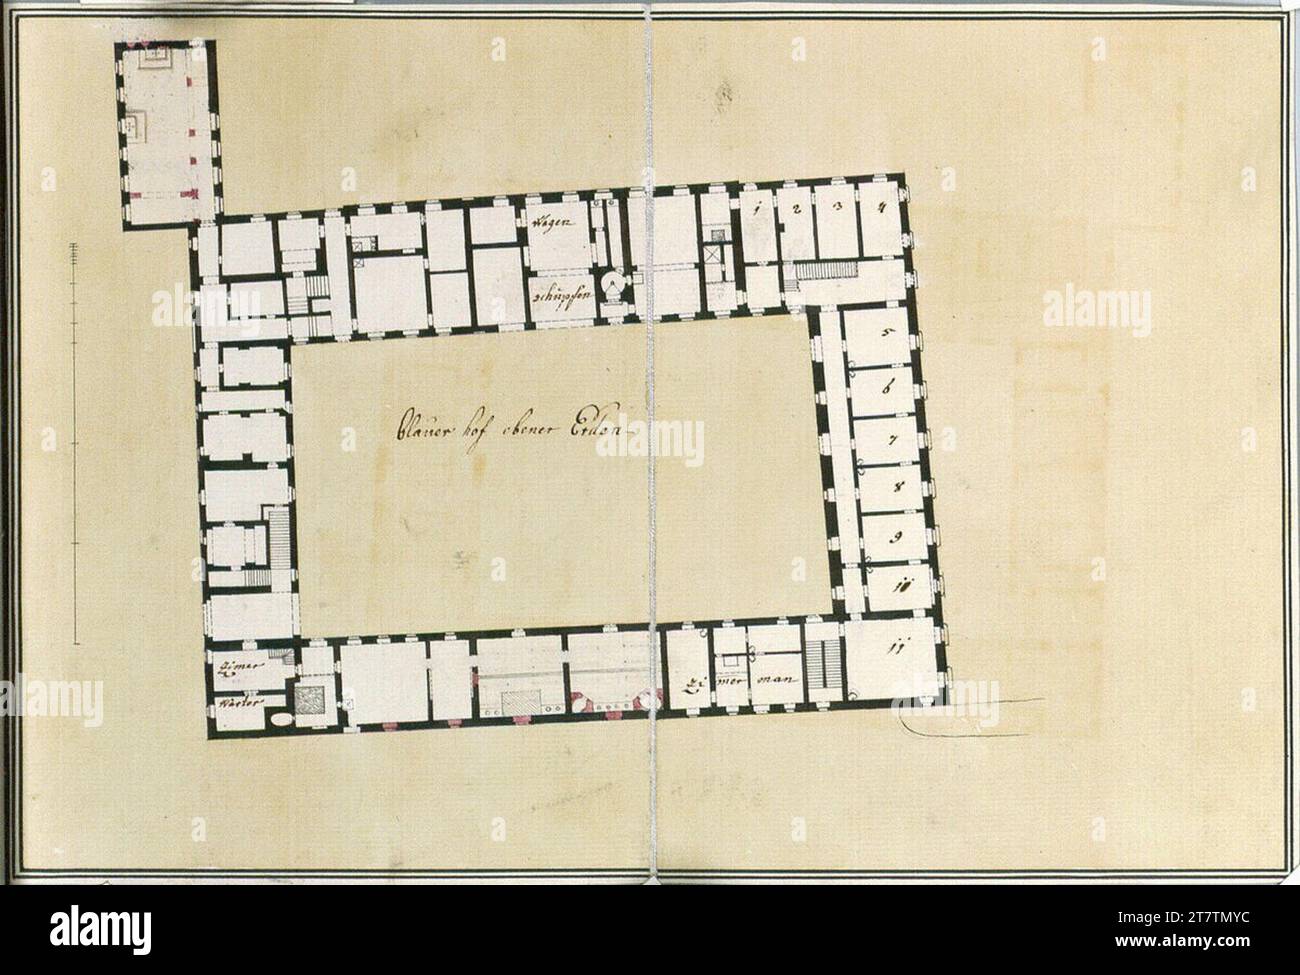 unbestimmt (An der Entstehung Beteiligte r) Laxenburg, castle, blue farm, floor plan, ground floor. Paper; Pen drawing; Graphite (before) drawing, spring in black, olive green and red lavated; Verso: black stamp Stock Photo